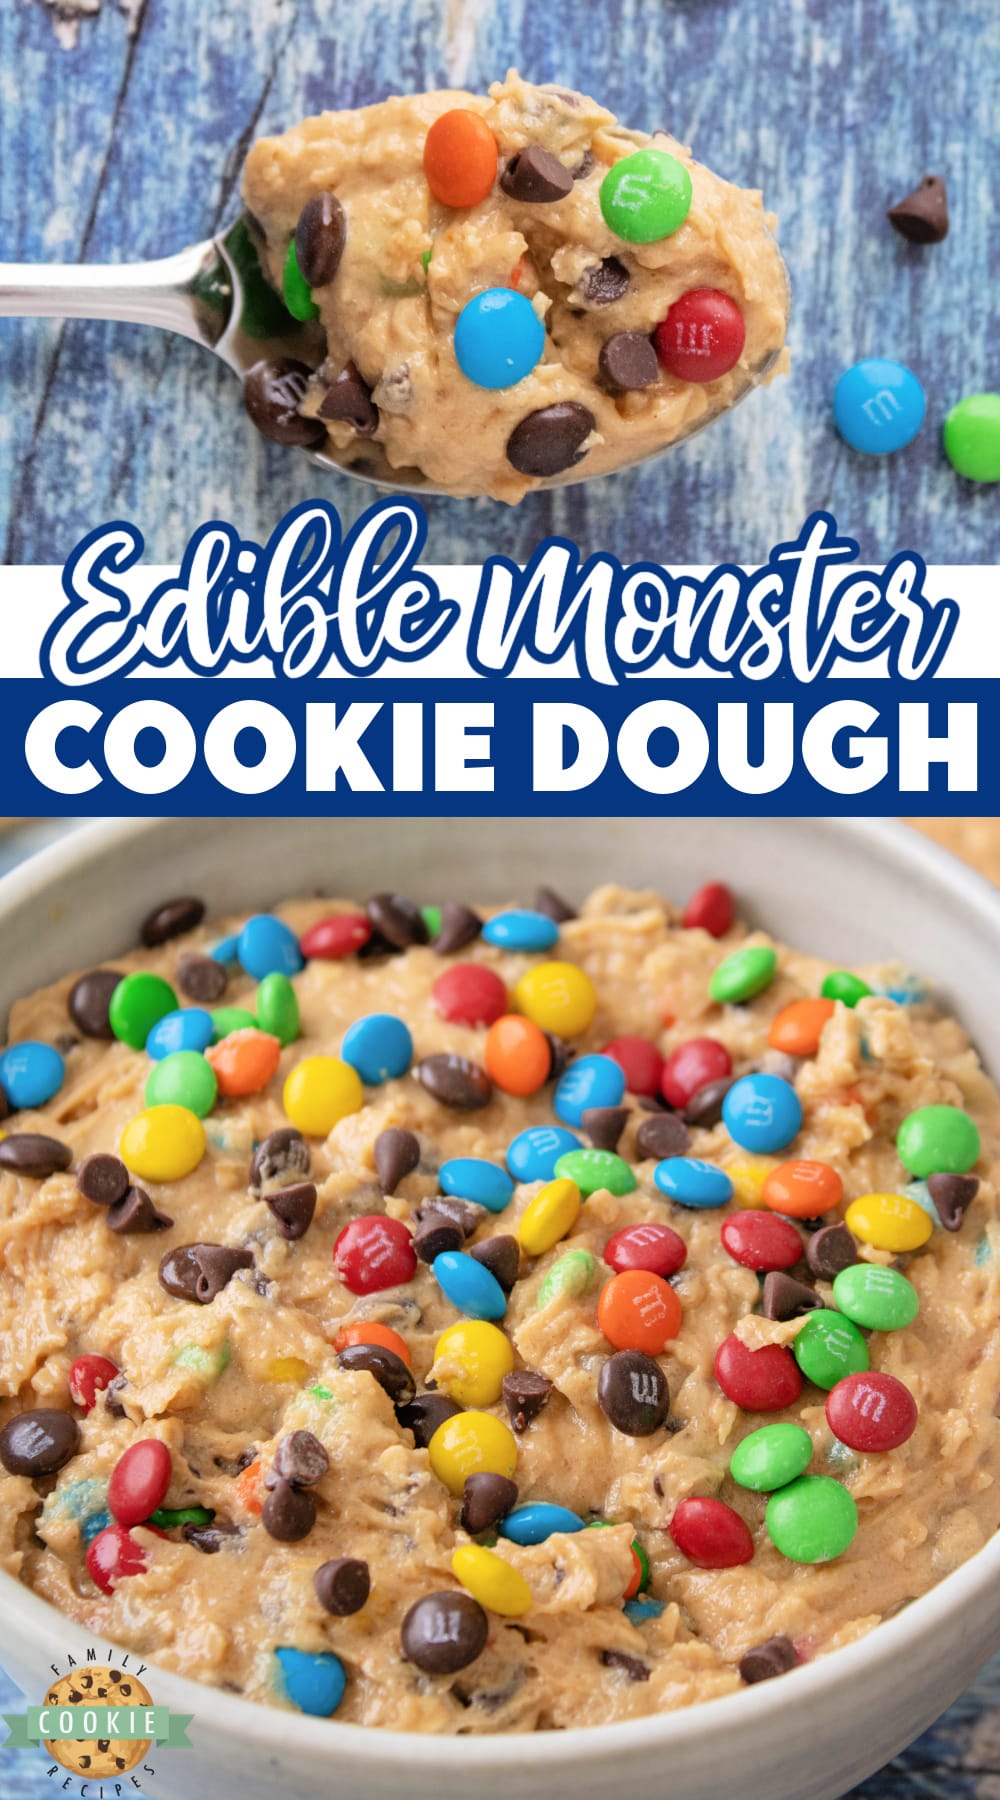 Edible Monster Cookie Dough made with heat-treated flour, no eggs and all of the peanut butter cookie dough flavor that you love. Monster cookie dough that is completely safe to eat!